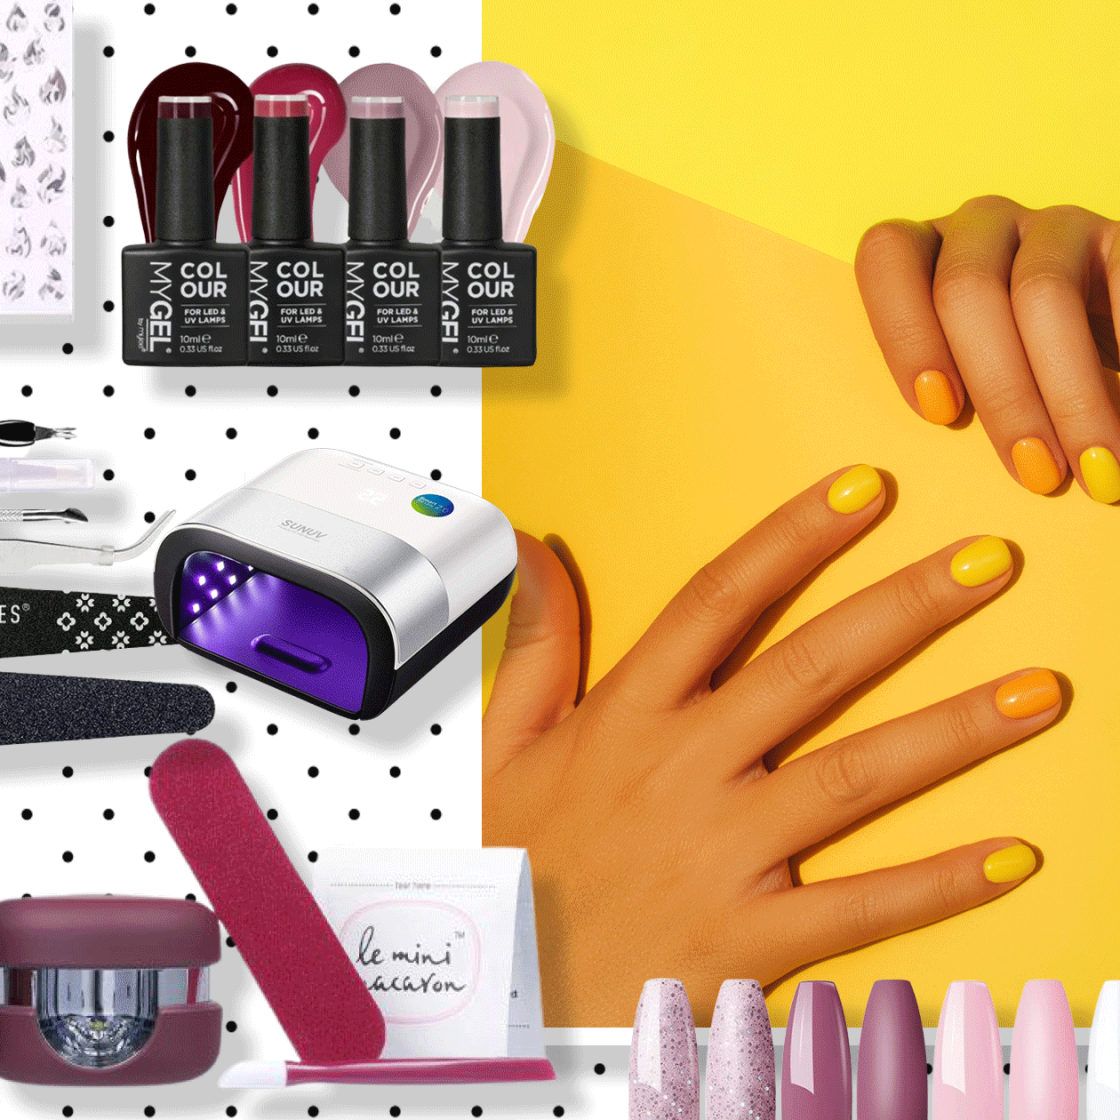 Buy Gellen Gel Nail Polish Kit with U V LED Light 72W Nail Dryer, 12 Summer Gel  Nail Colors, No Wipe Top Base Coat, Nail Art Decorations, Manicure Tools,  All-In-One Manicure Kit,